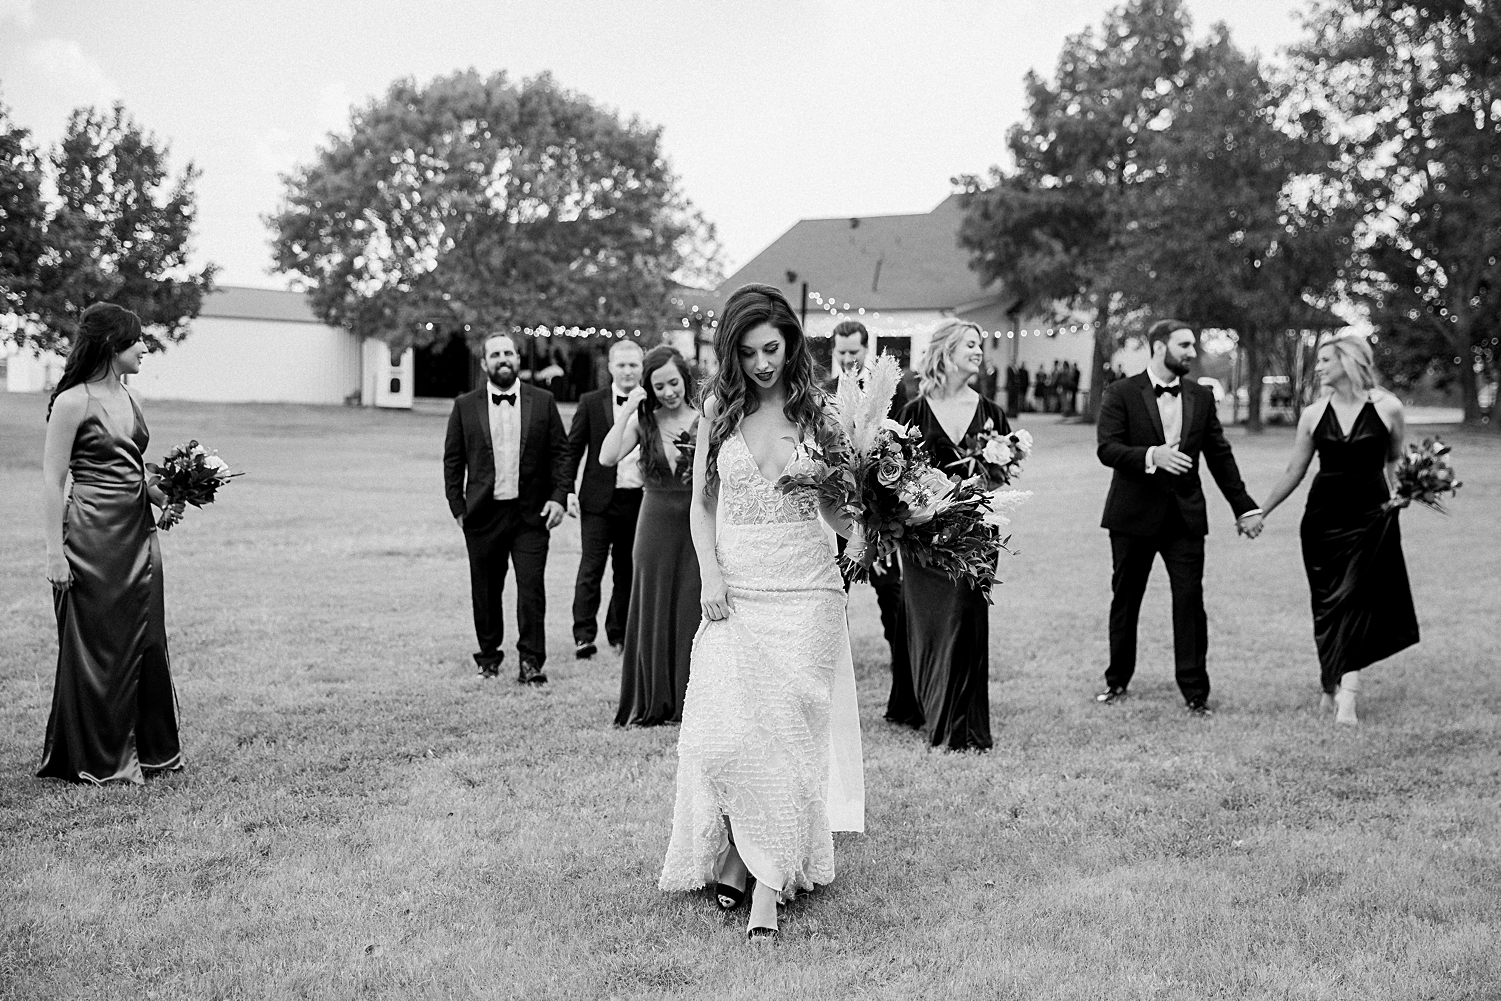 bridal wedding party walking in grass field black and white